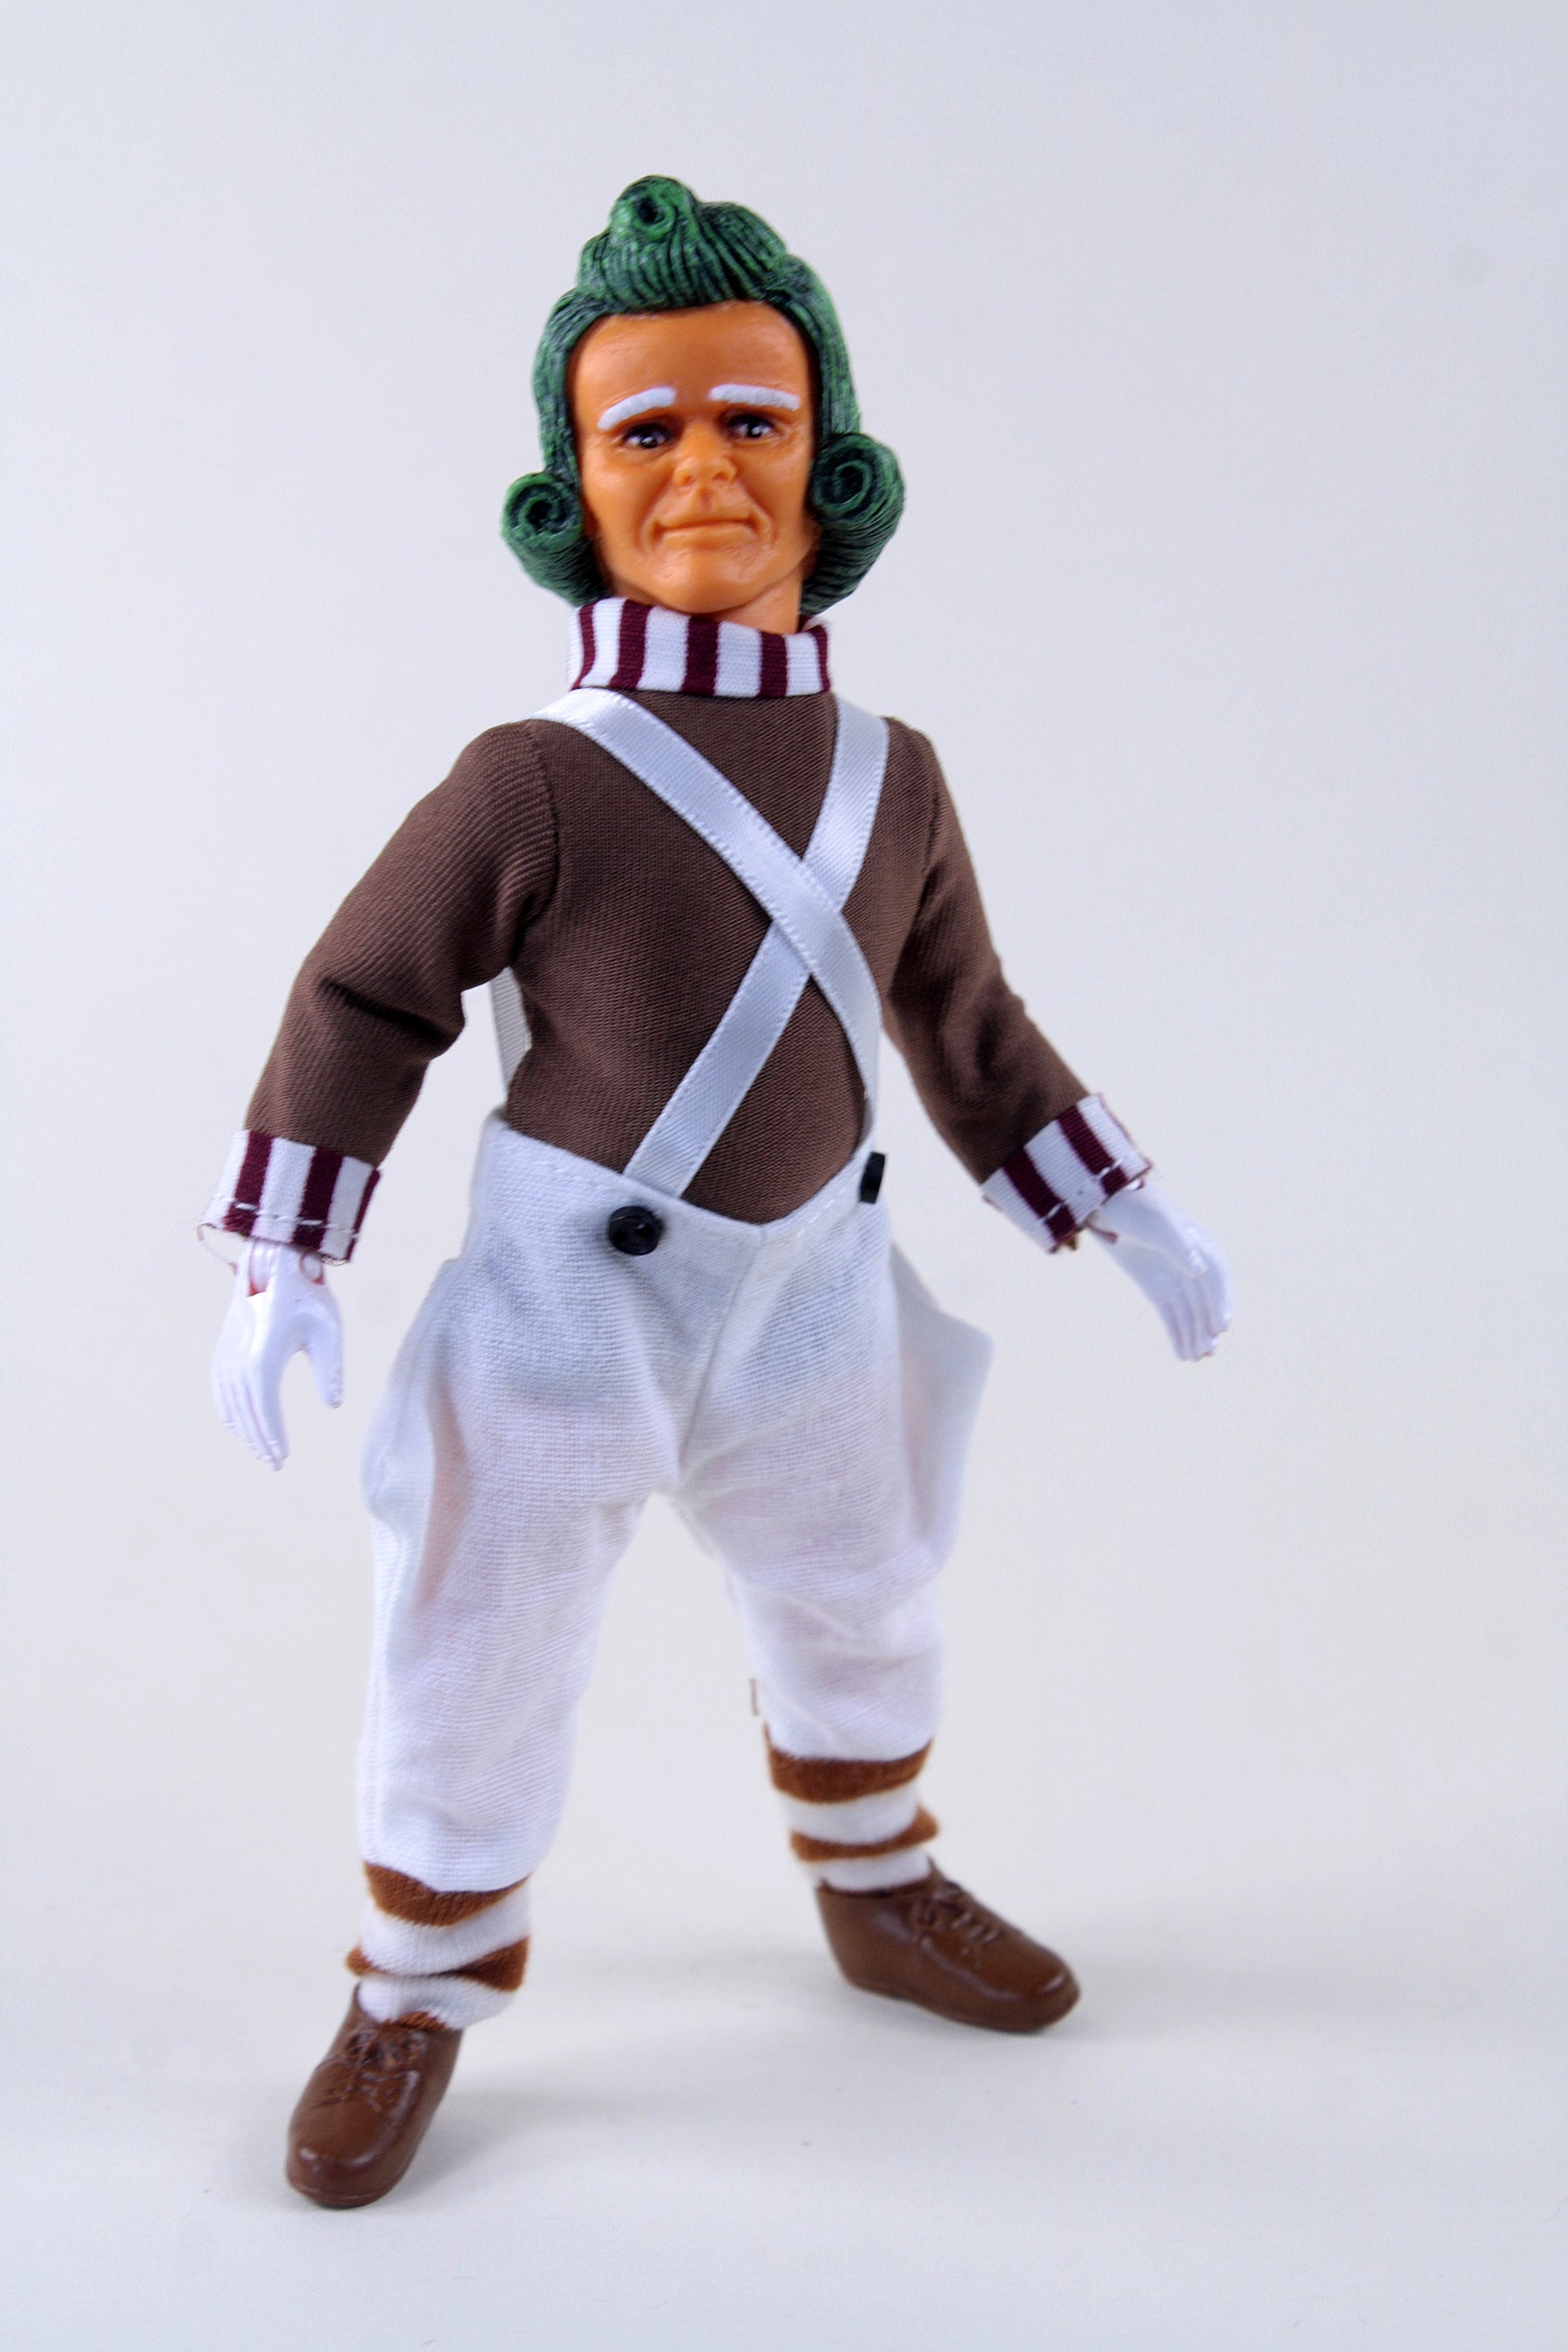 Mego Movies Wave 18 - Oompa Loompa (Willy Wonka) 8" Action Figure (Pre-Order Release Date To Be Determined)